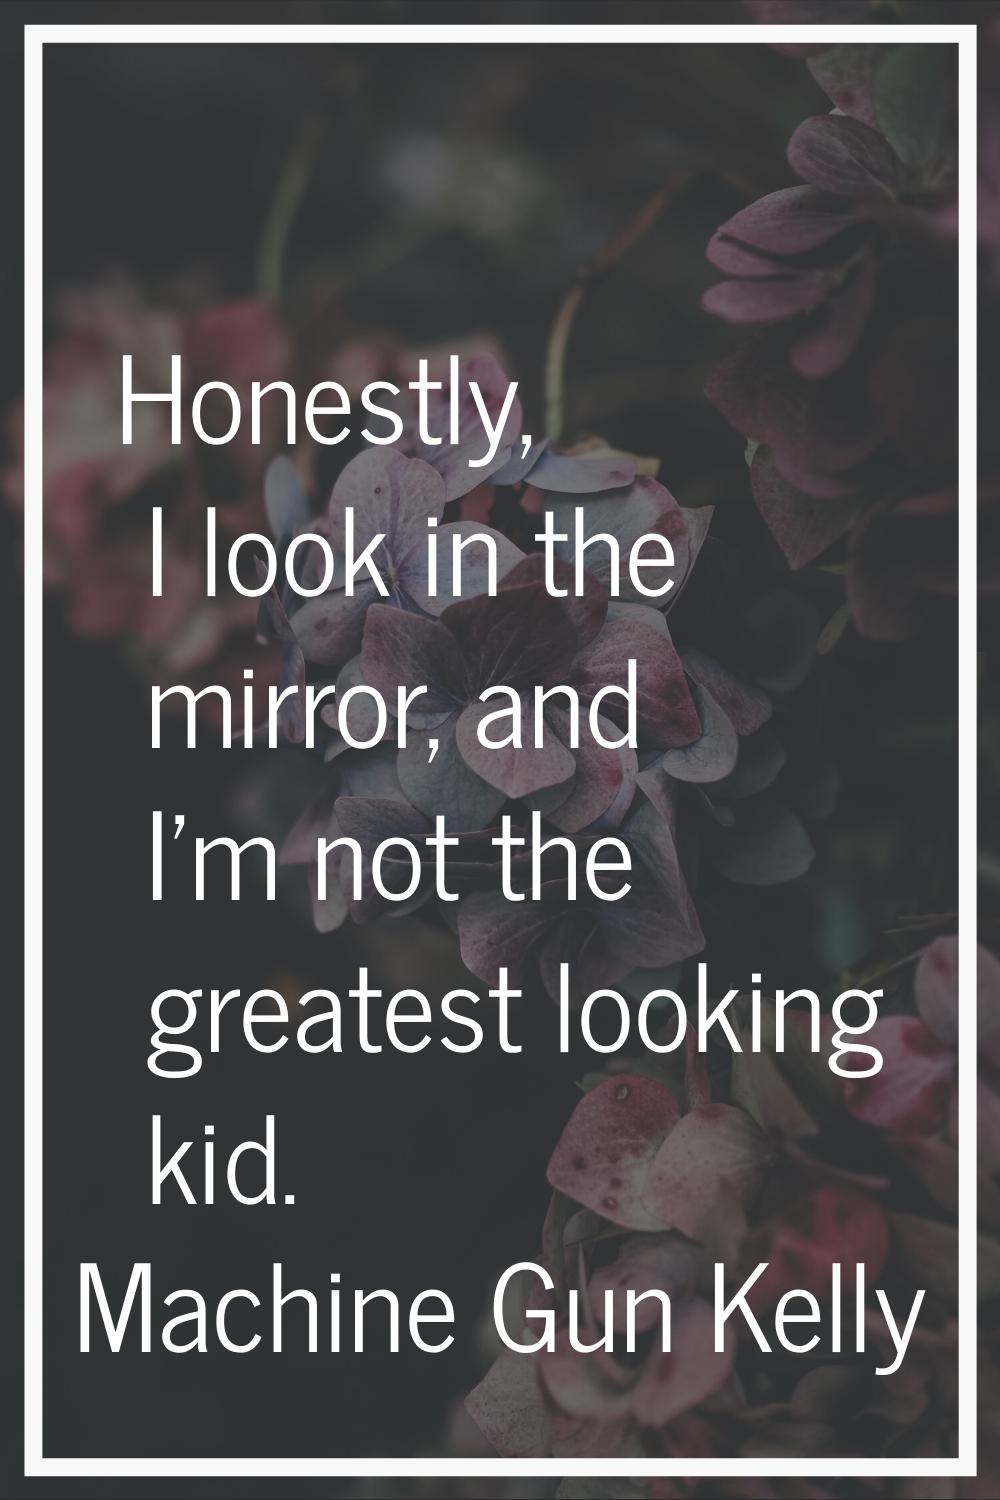 Honestly, I look in the mirror, and I'm not the greatest looking kid.